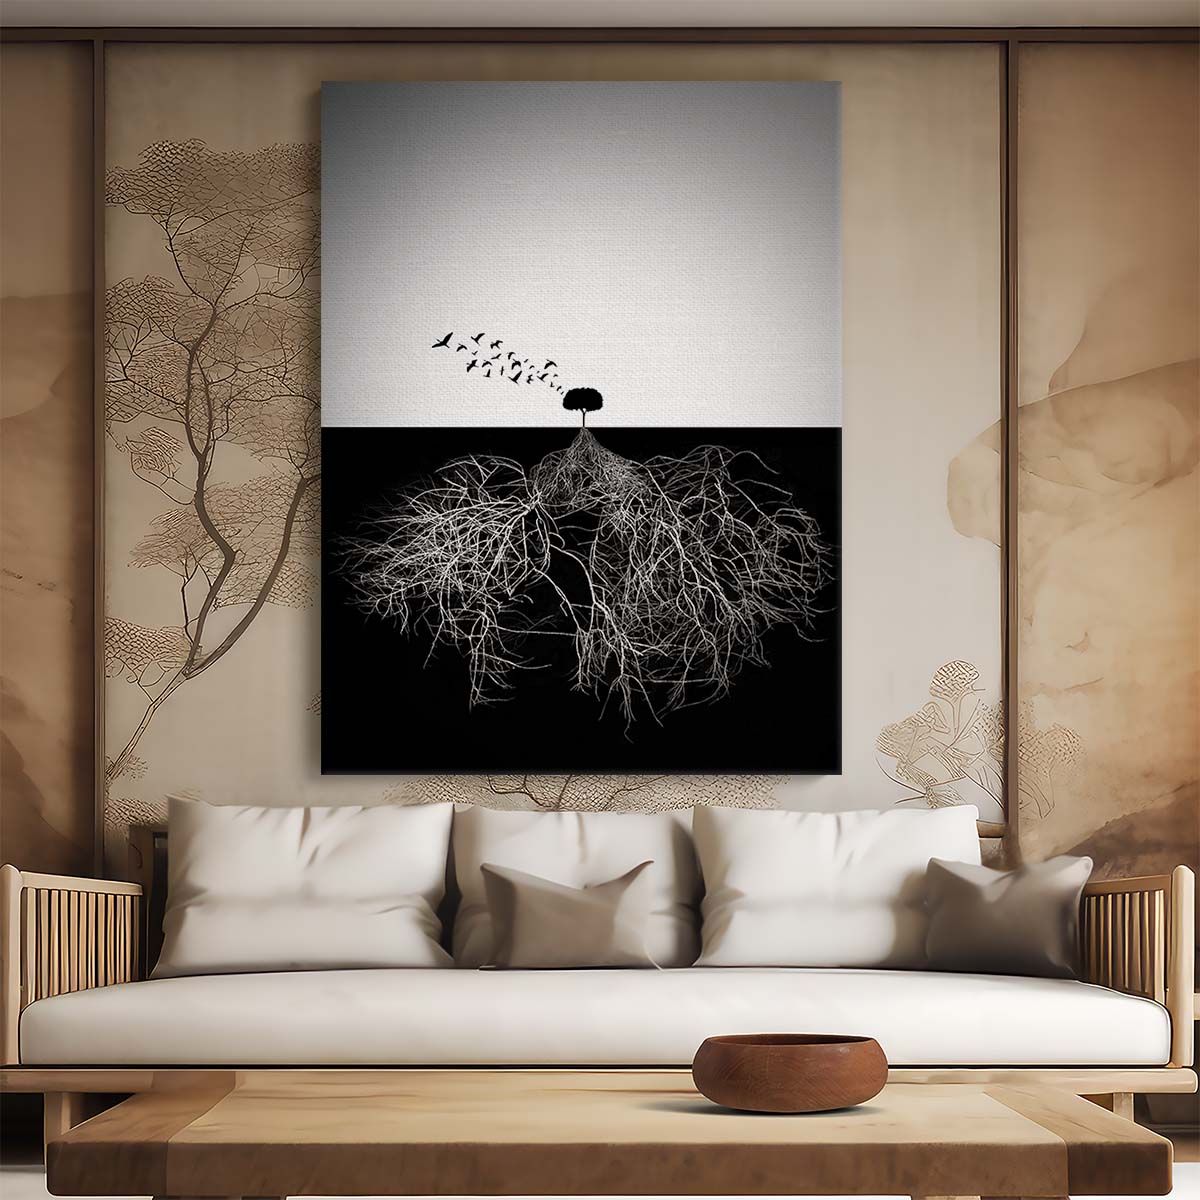 Surrealist Black & White Tree Roots Birds Photo Montage Artwork by Luxuriance Designs, made in USA